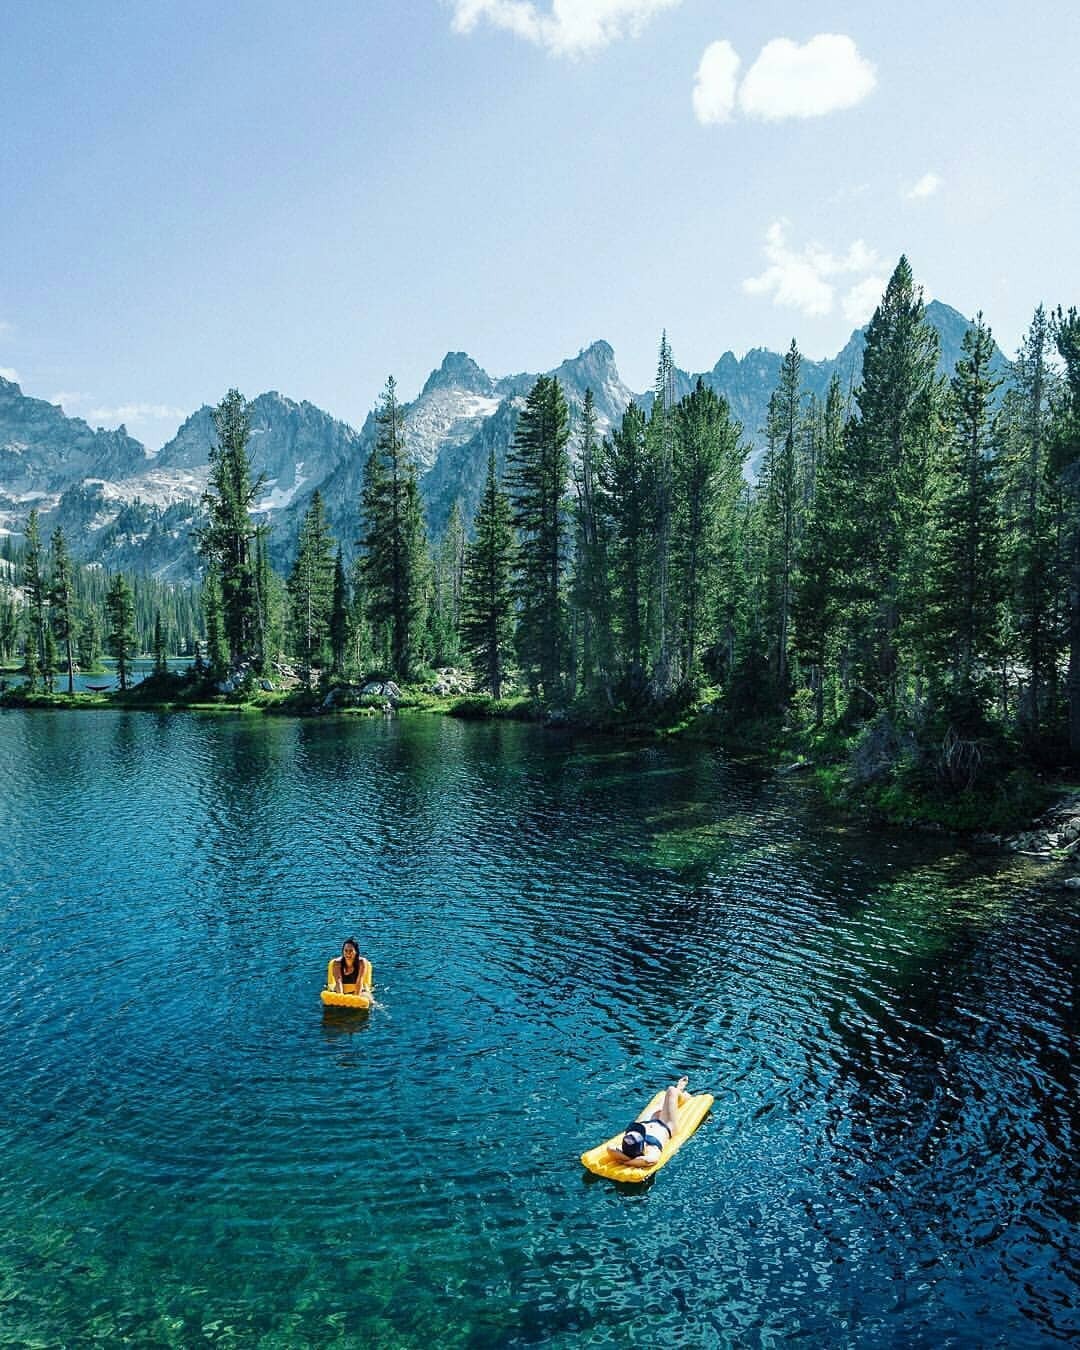 🌎 Sawtooth Wilderness, Idaho, US
Regranned from @wheretowillie - Sleeping pads make for perfect pool floaties. Bonus points if the pool is actually an alpine lake.
#adventure #wanderlust #wanderer #wander #outdoors #outdoor #photography #nature...